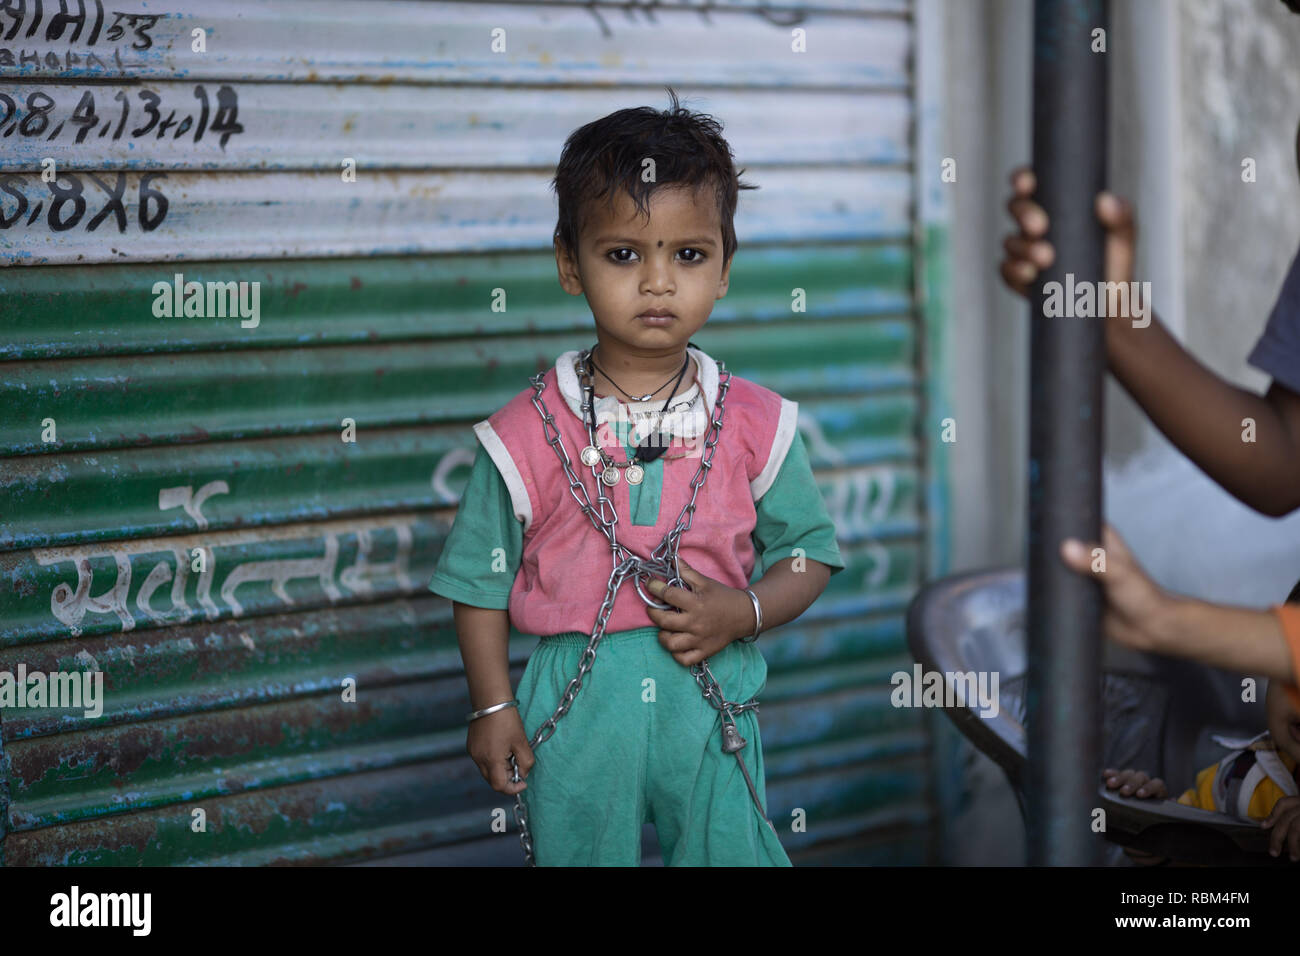 India. 13th Mar, 2017. A local child seen posing for a photo near the derelict Union Carbide factory, Bhopal.The Bhopal Gas Disaster was a gas leak incident on the night of 2-3 December 1984 at the Union Carbide plant in Bhopal. Over 500,000 people were exposed to the toxic methyl isocyanate (MIC) gas as they slept. The final death toll is estimated to be between 15,000 and 20,000. Credit: Ryan Ashcroft/SOPA Images/ZUMA Wire/Alamy Live News Stock Photo